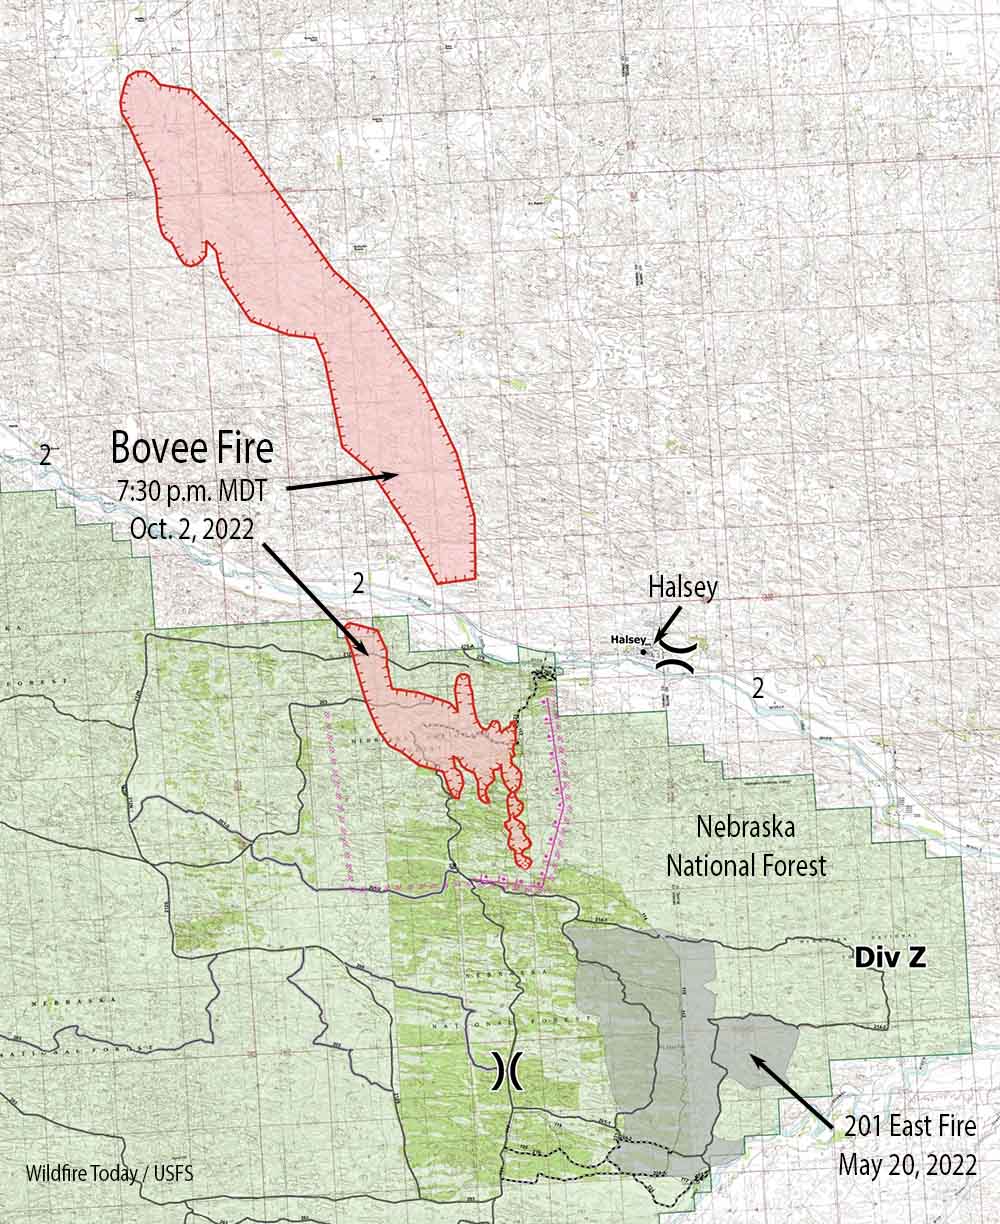 Map of Bovee Fire 7:30 p.m. October 2, 2022.